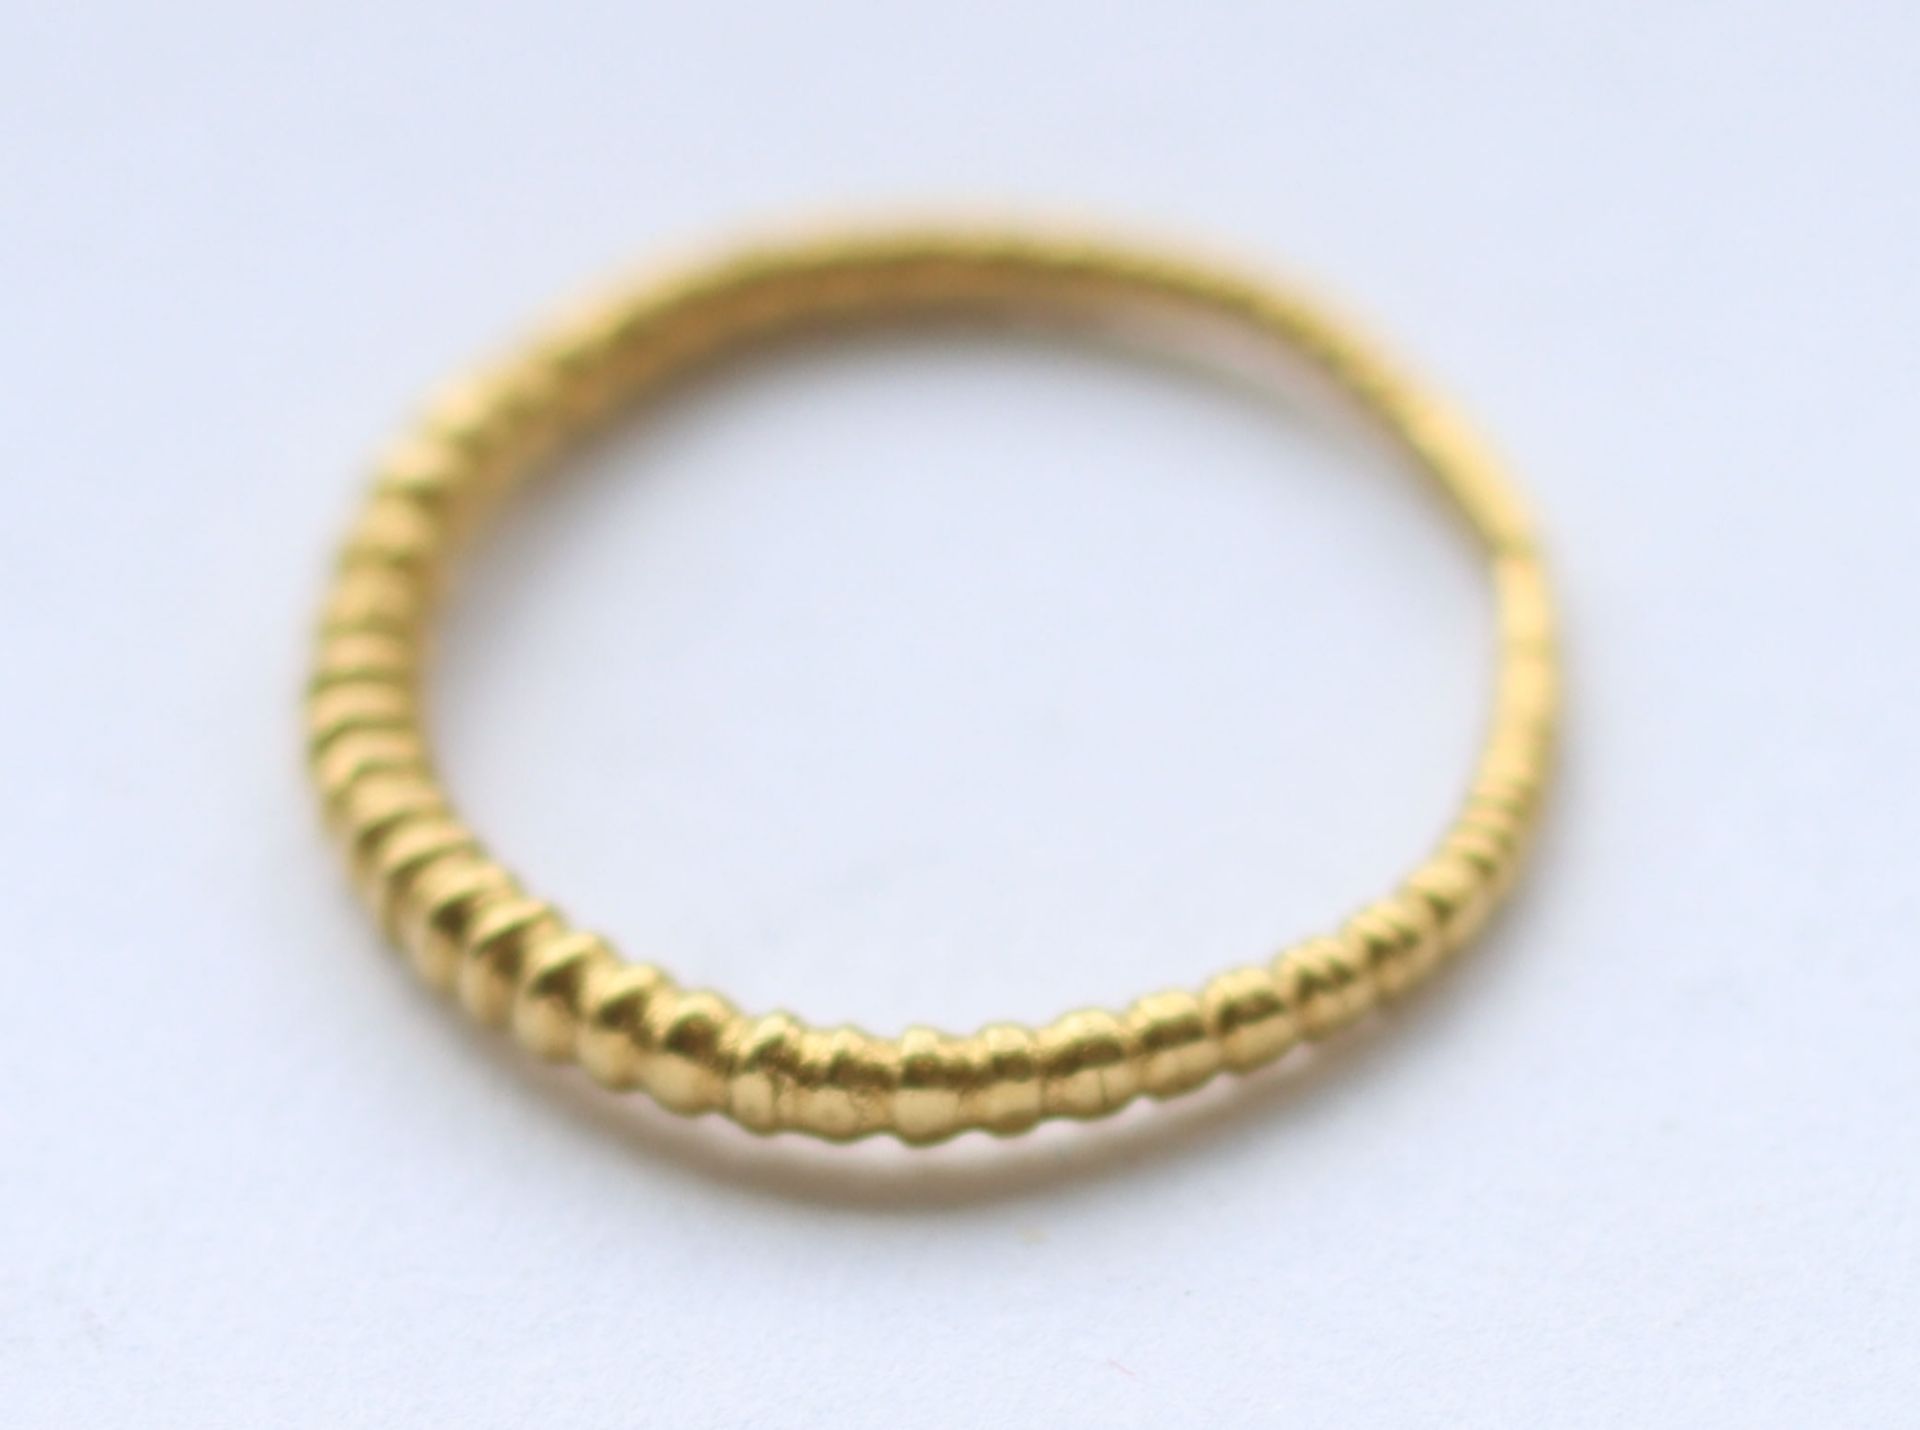 An Anglo-Saxon or Viking gold finger ring, 10th-11th Century - Image 2 of 3